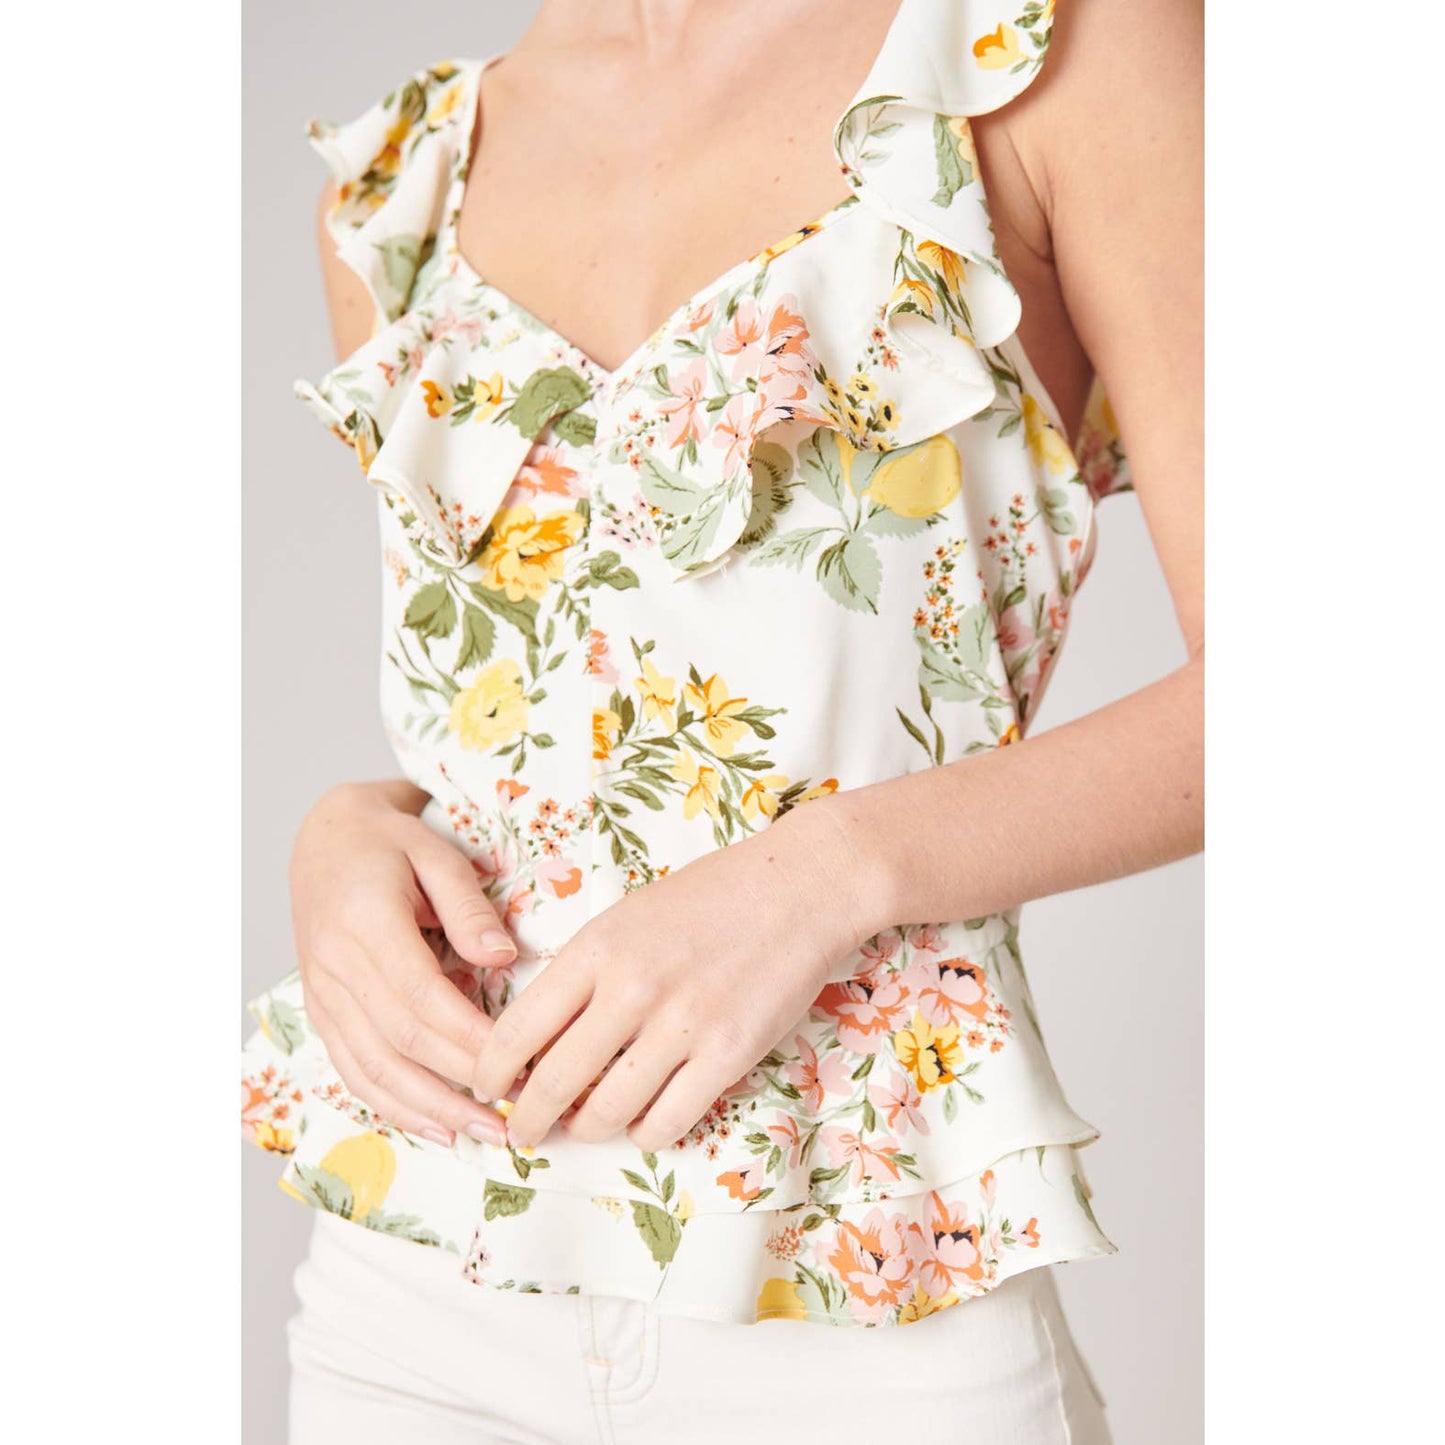 Sugarlips Kailey Floral Ruffle Top